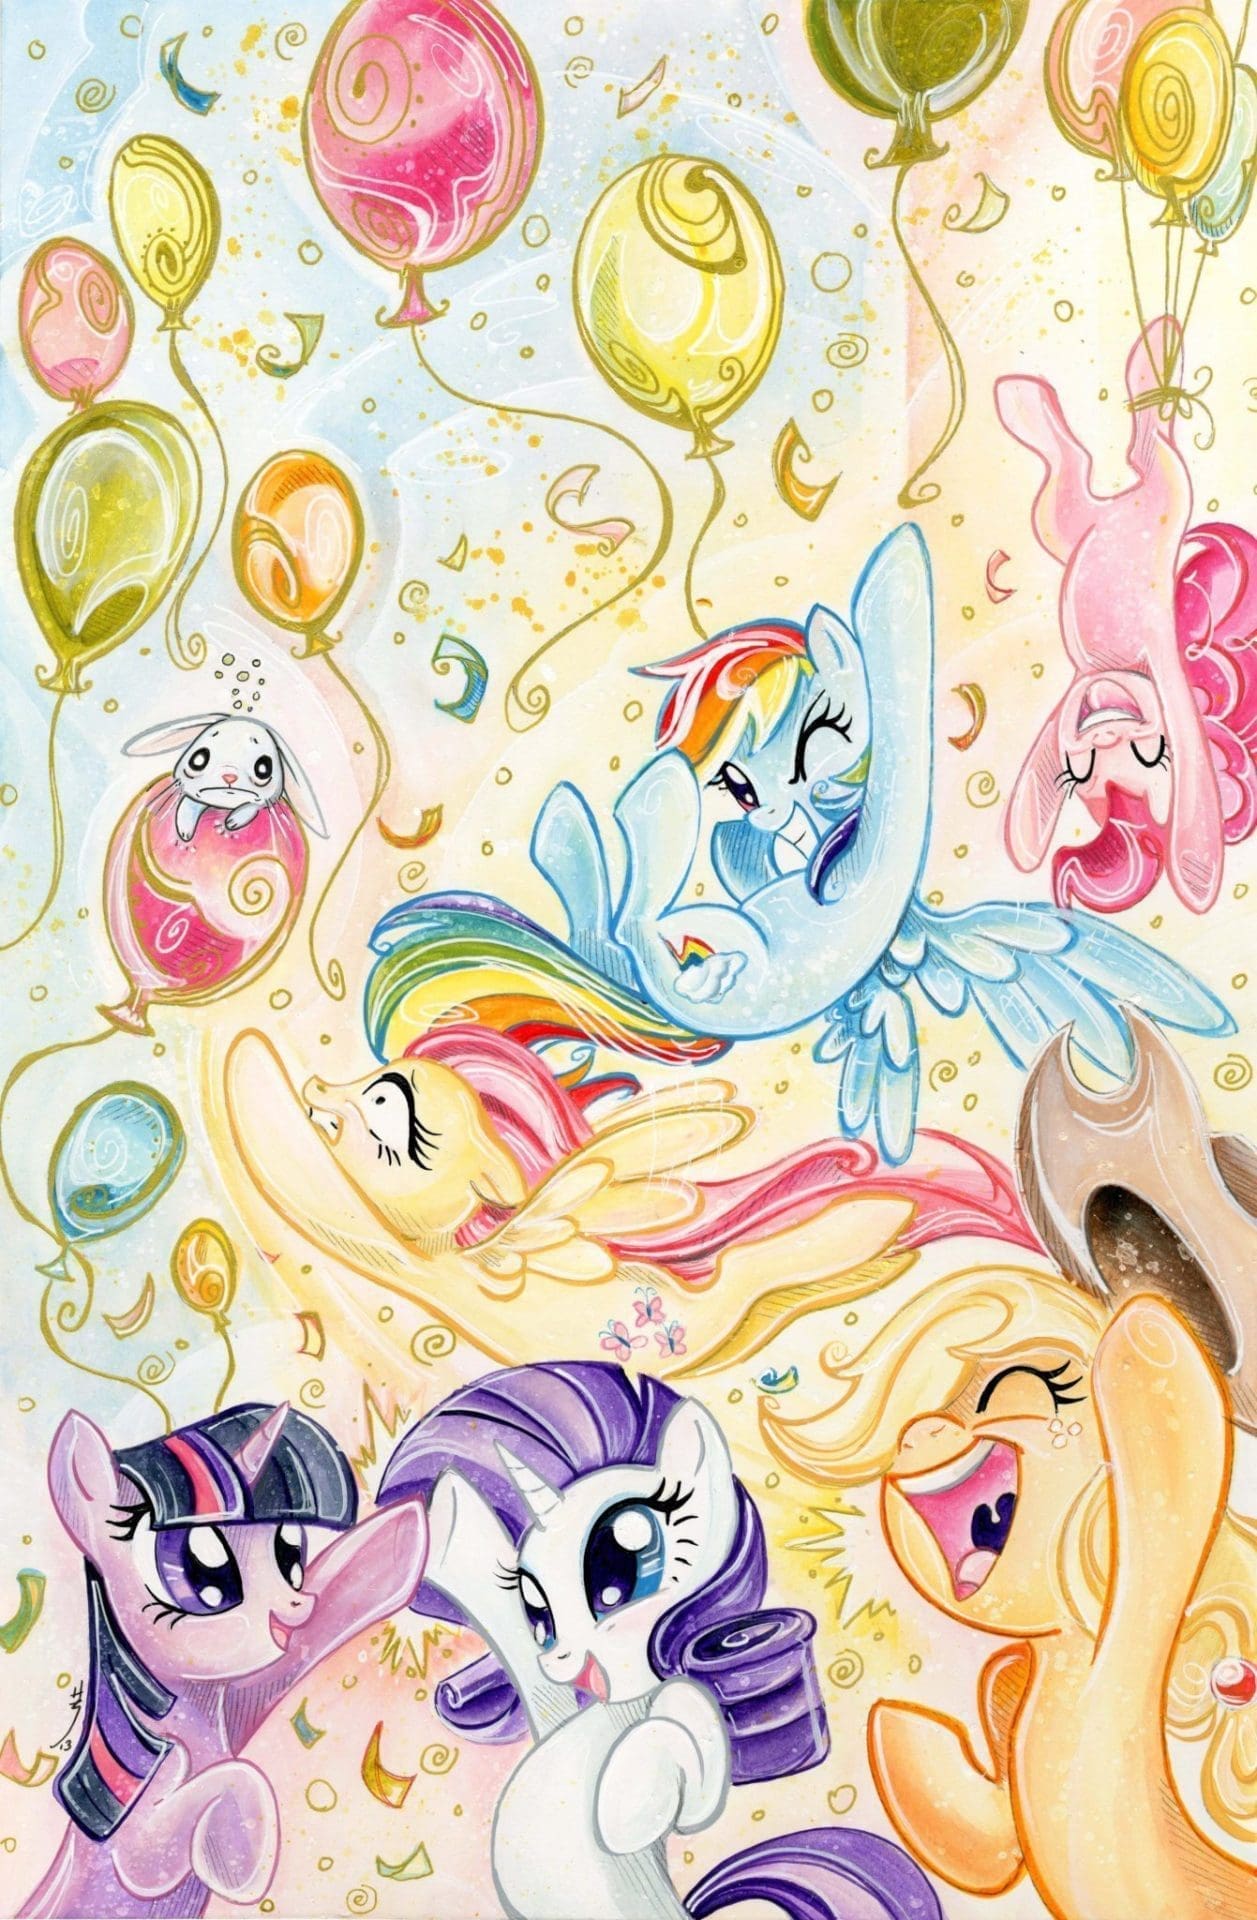 Give Kids The World, hasbro, Heritage Auctions, idw, my little pony